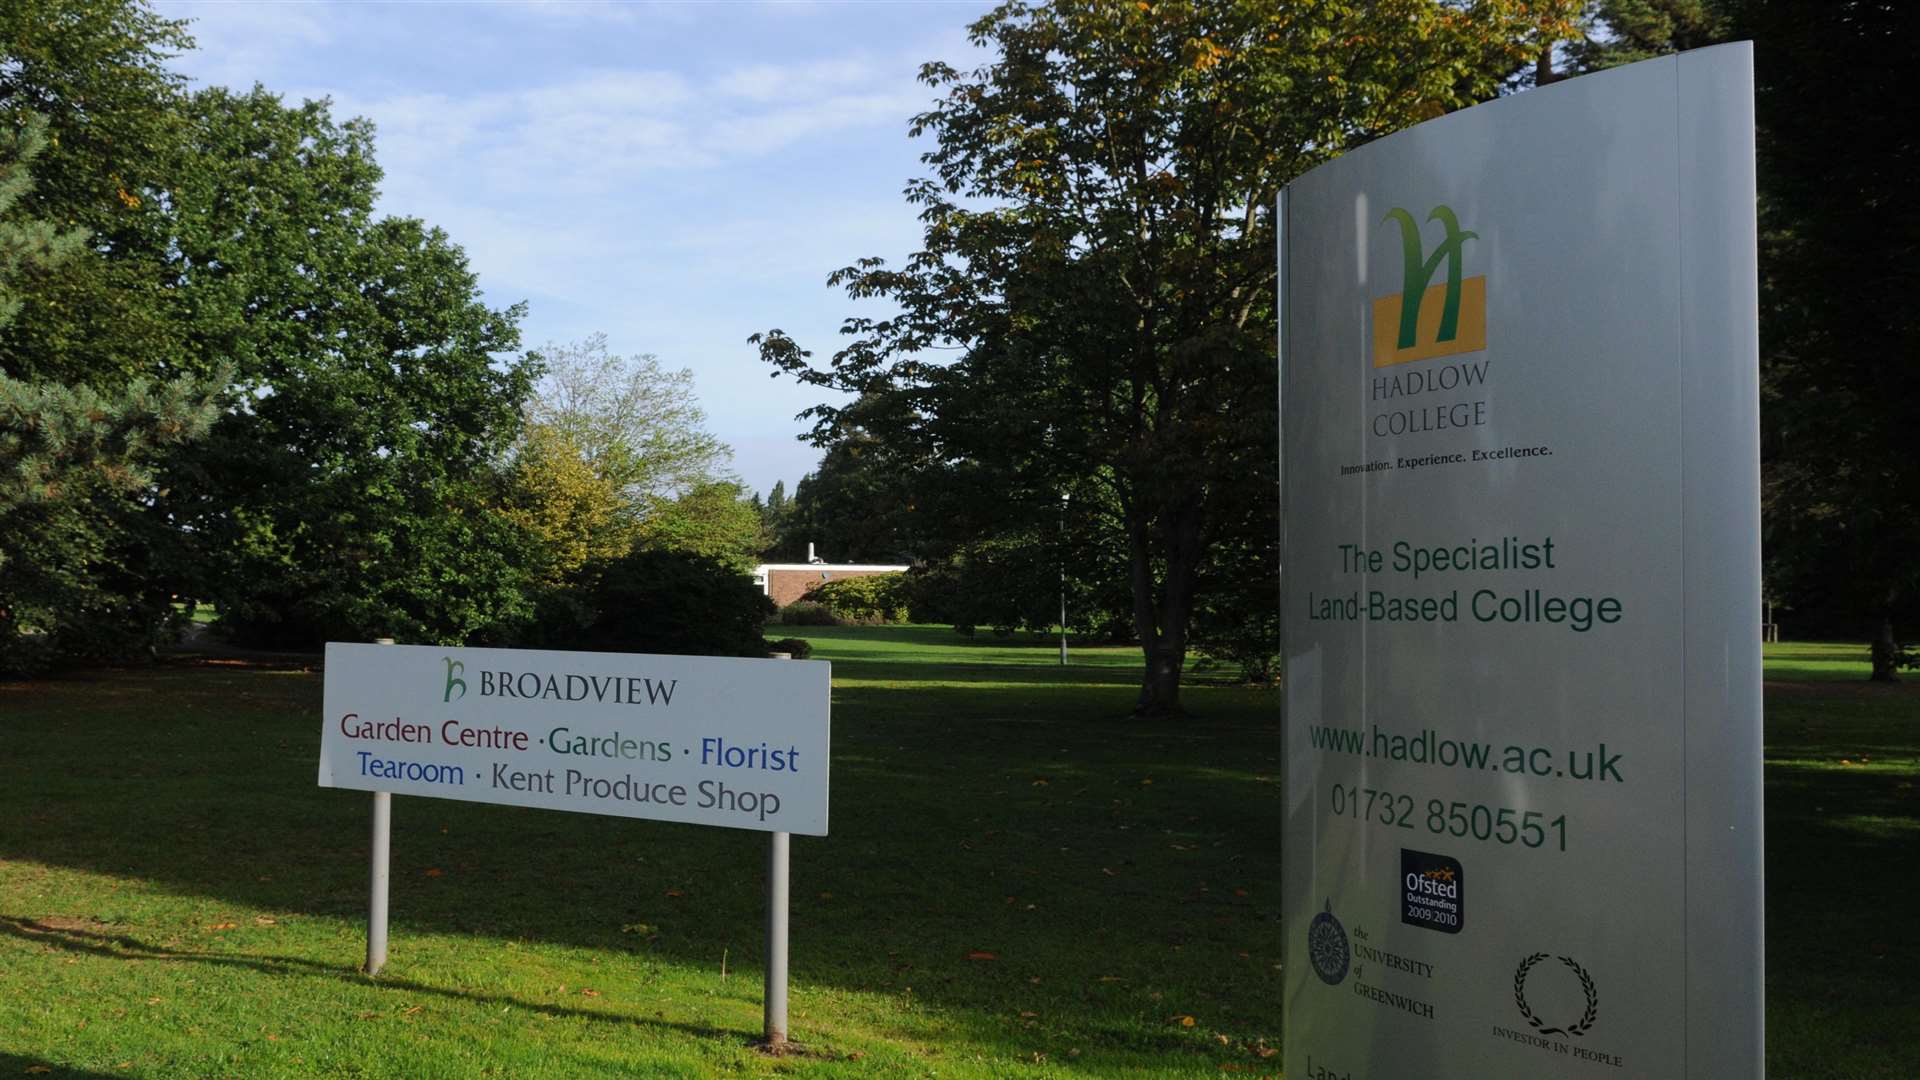 Hadlow Group is based at the college campus near Tonbridge